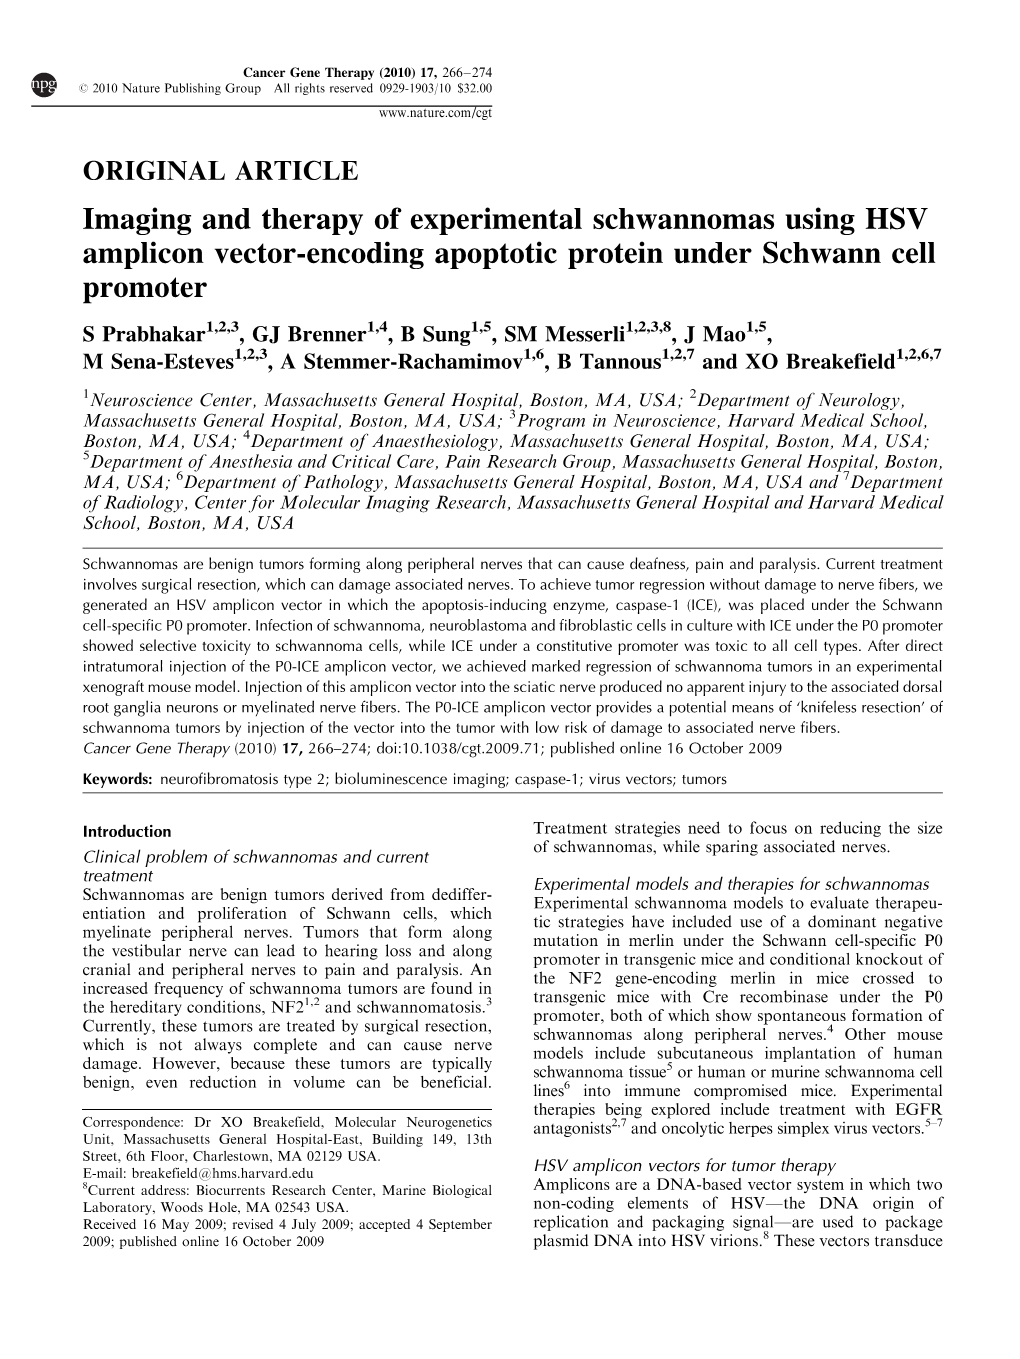 Imaging and Therapy of Experimental Schwannomas Using HSV Amplicon